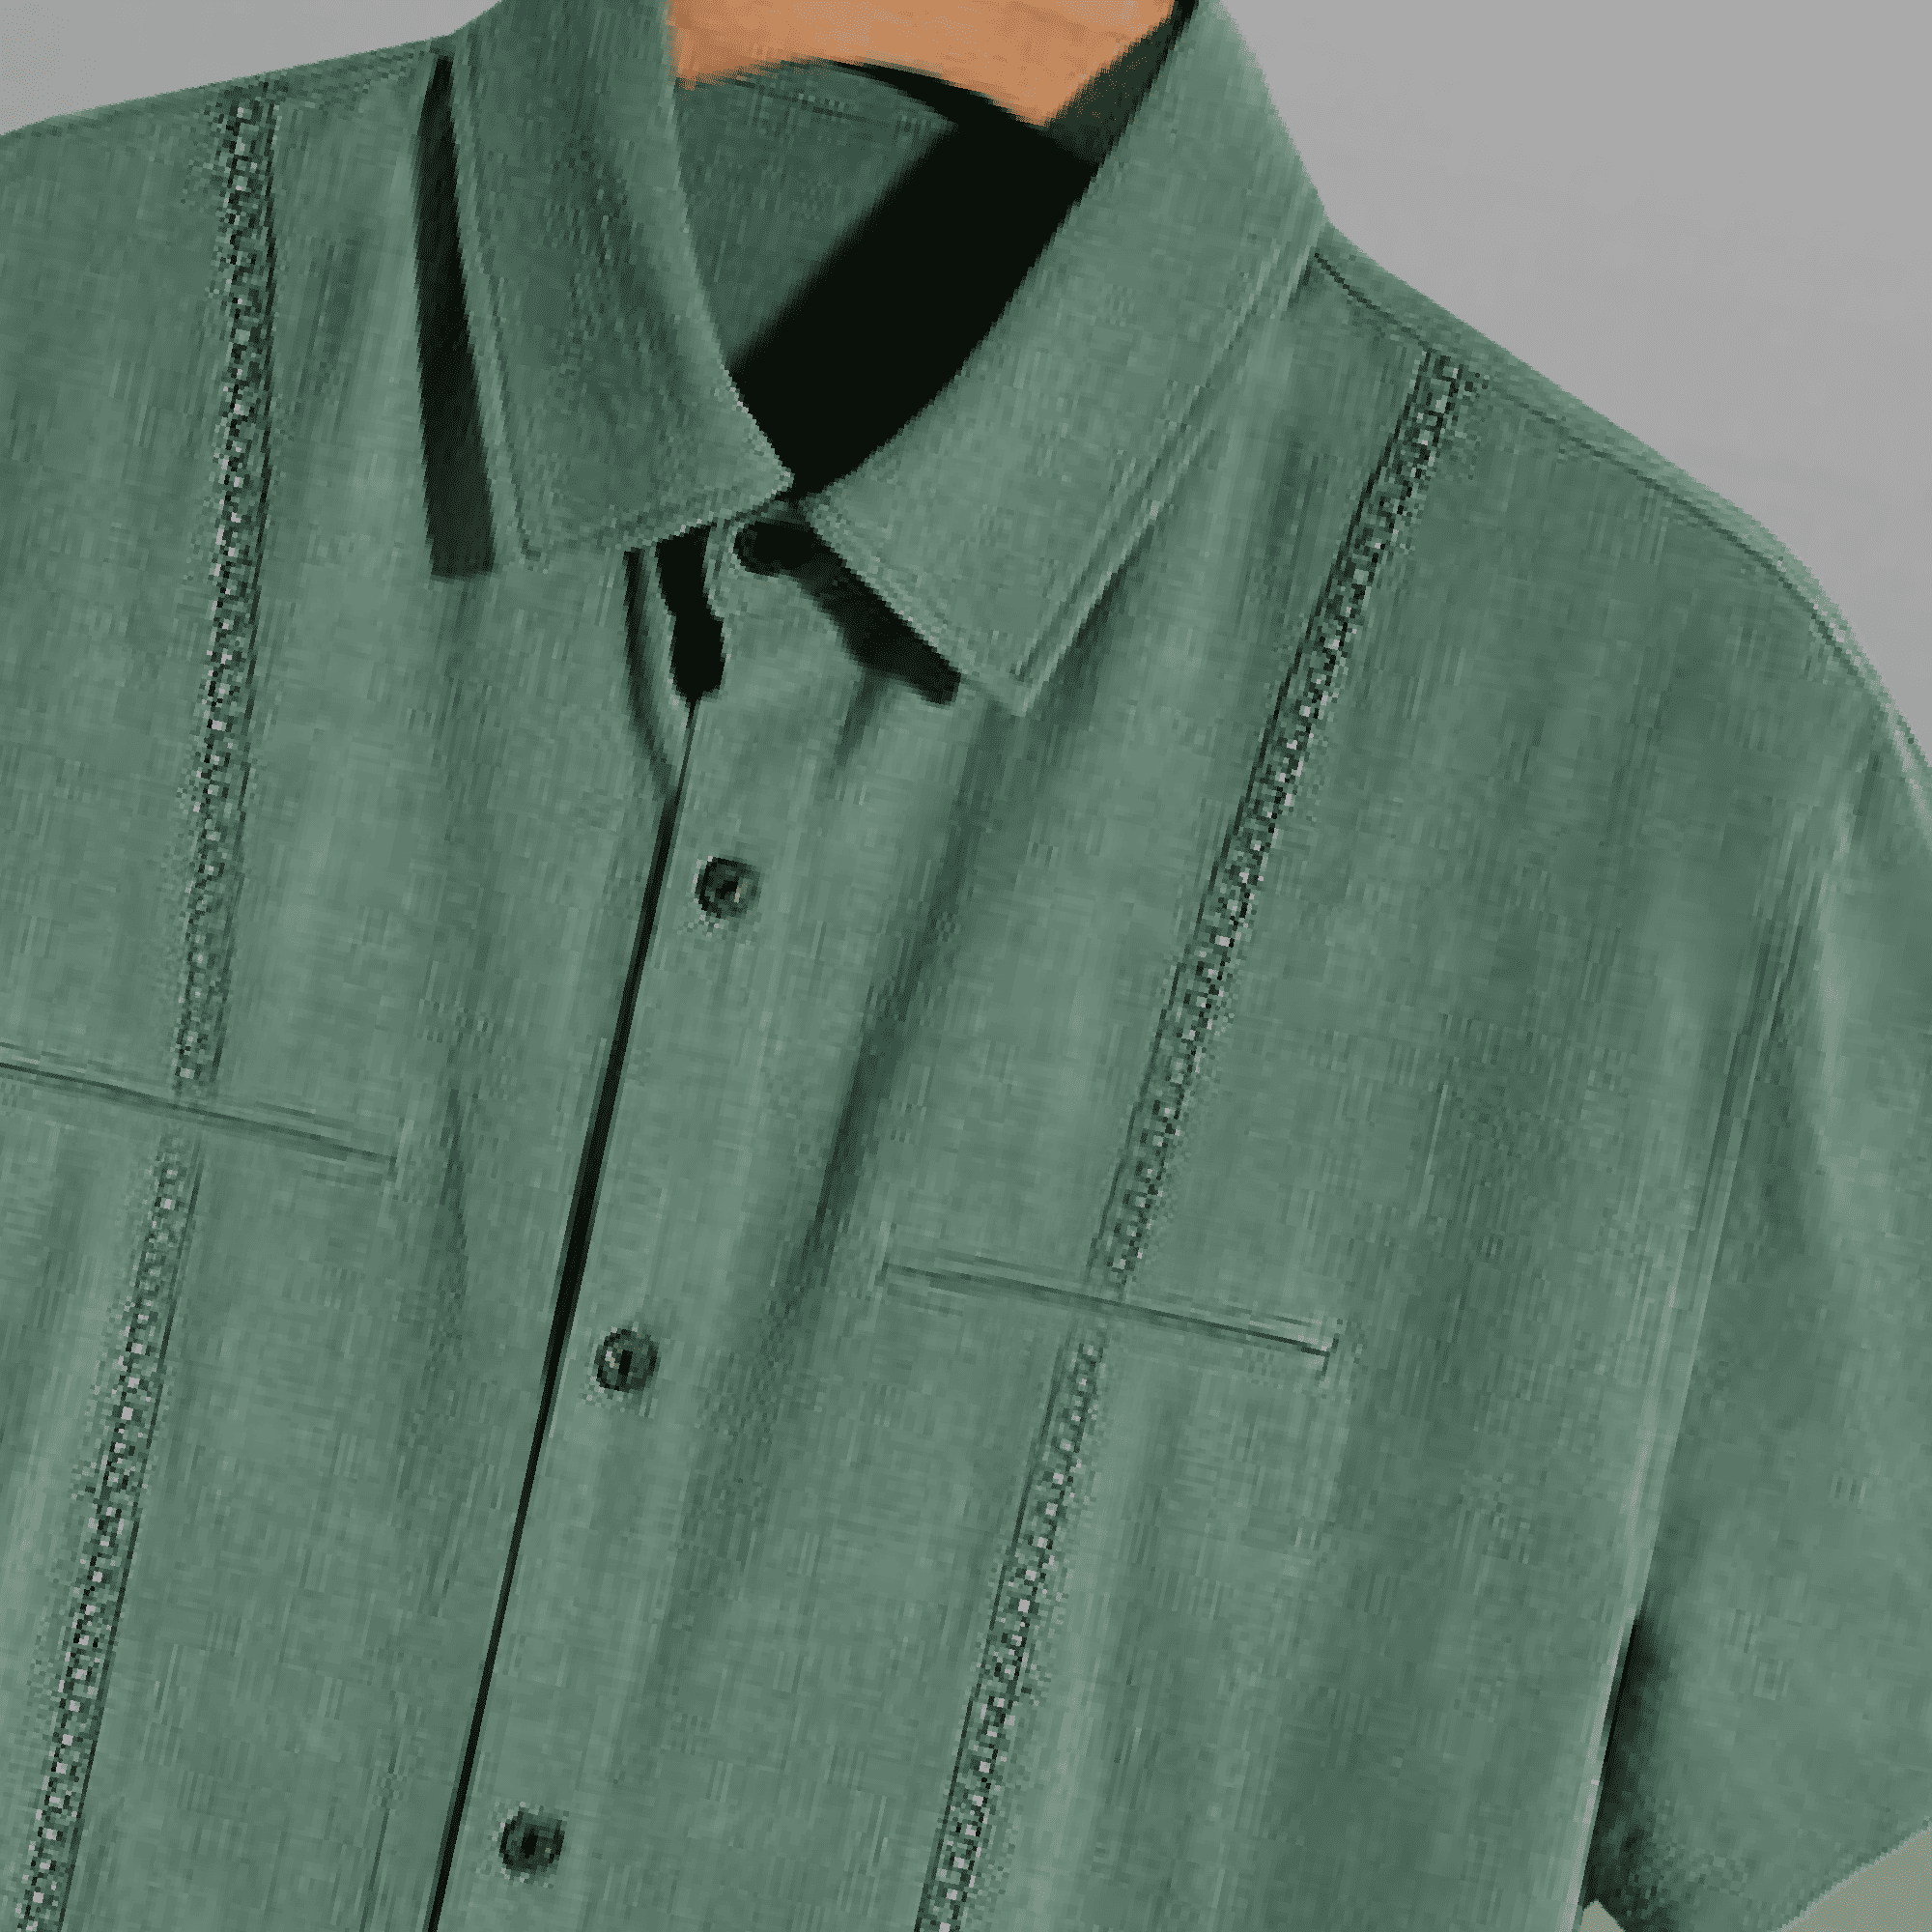 Men's Green Half Sleeve Shirt with Lace work and double side pocket-RMS040